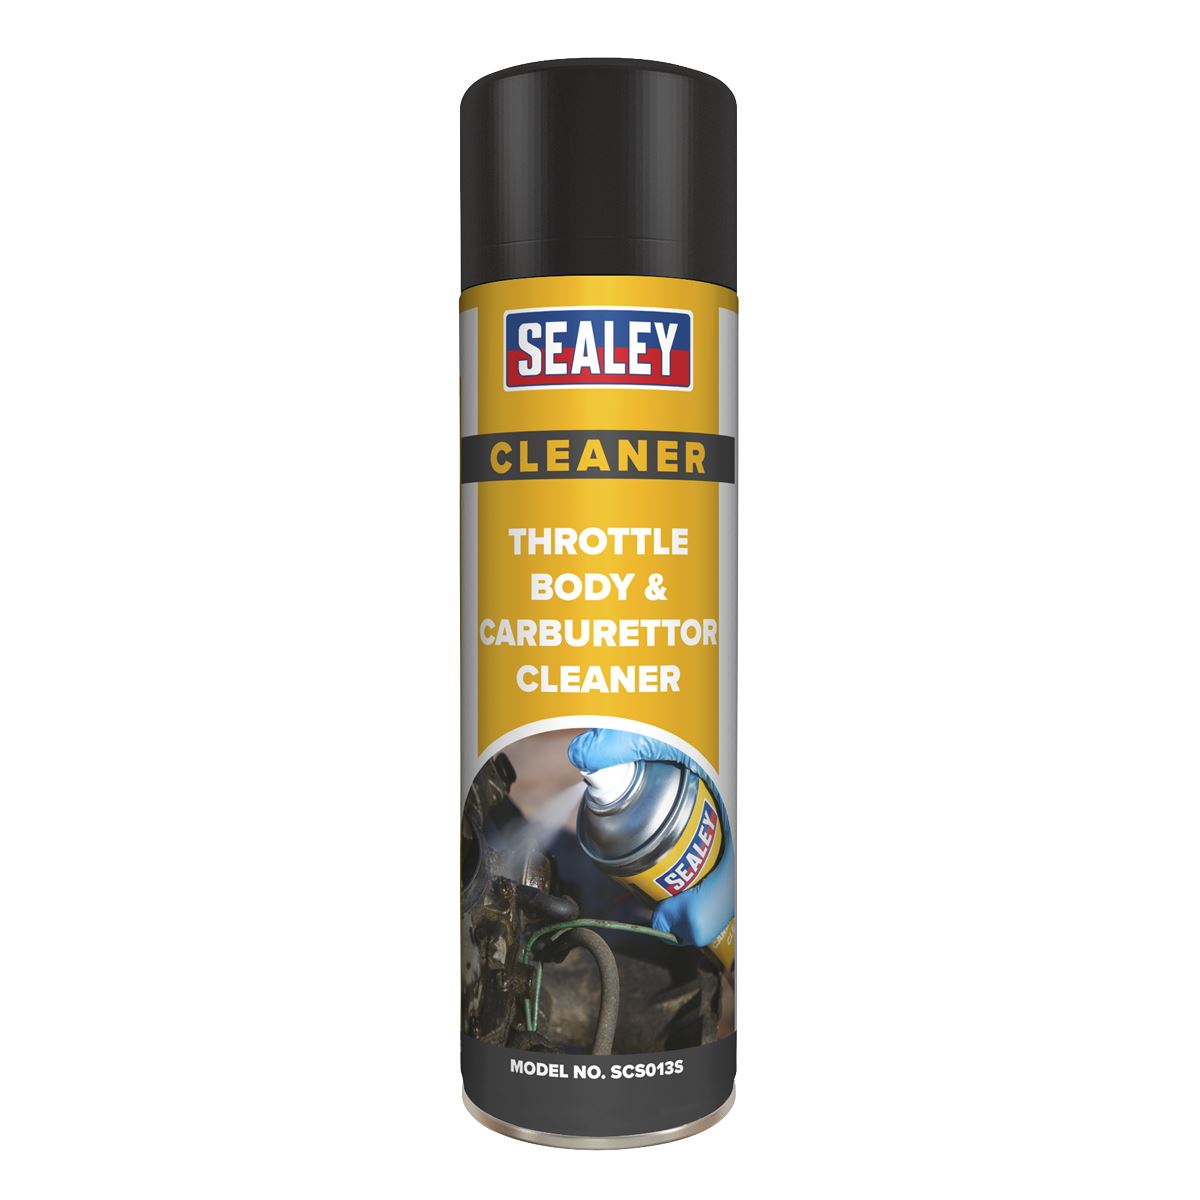 Sealey Throttle Body & Carburettor Cleaner 500ml Pack of 6